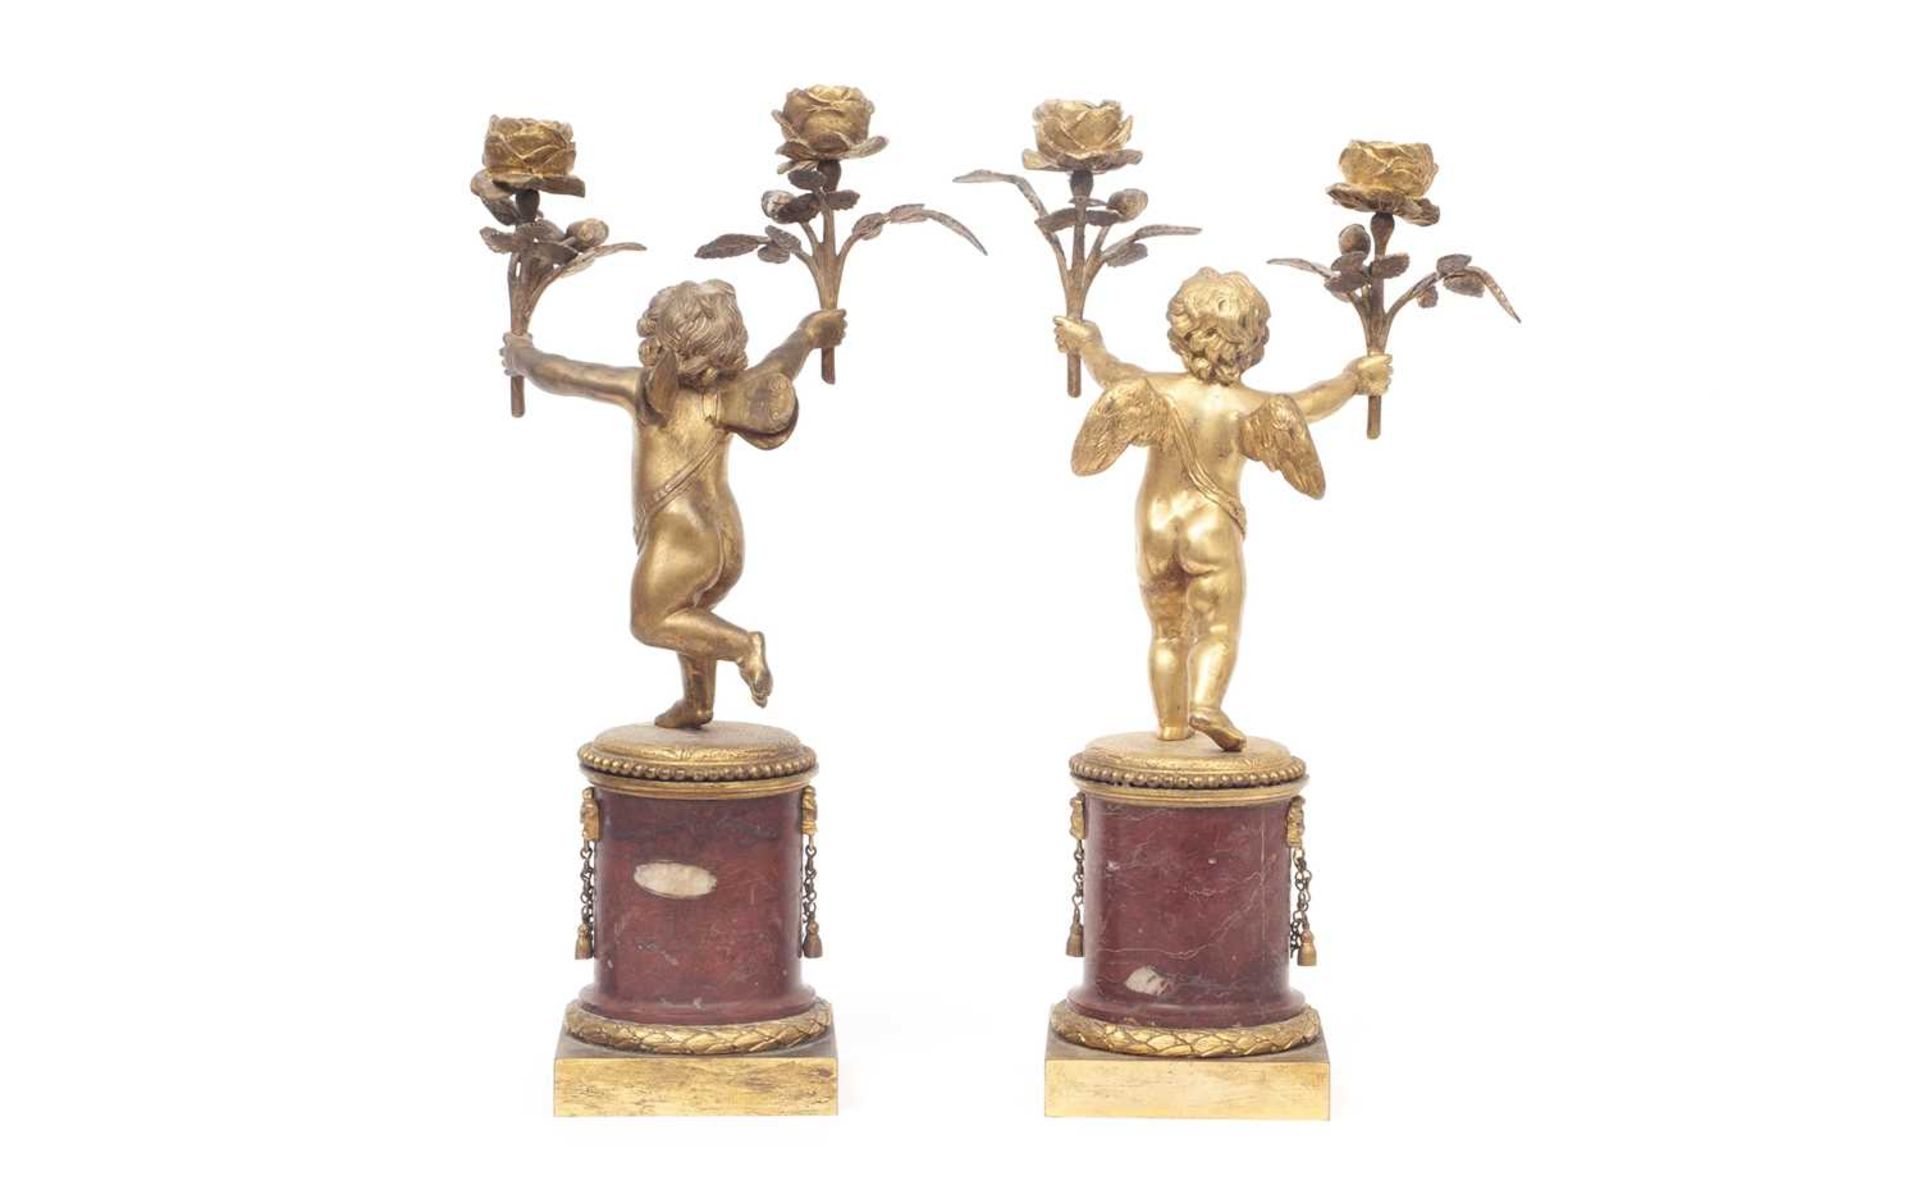 A PAIR OF 19TH CENTURY FRENCH GILT BRONZE AND MARBLE CHERUB CANDELABRA - Image 2 of 2